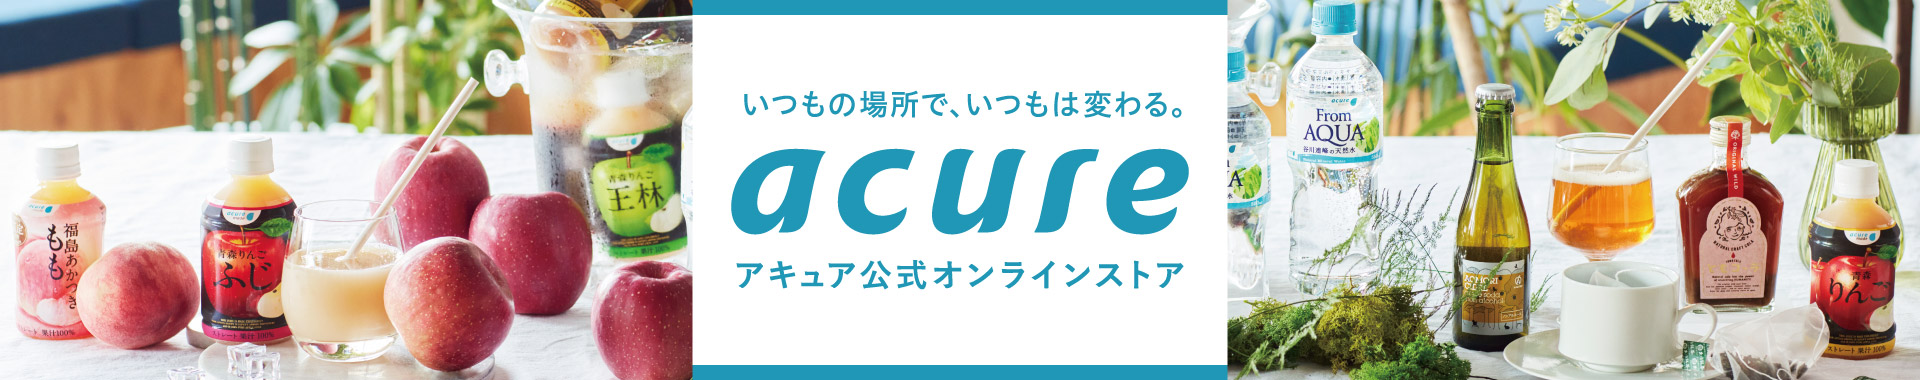 acure＜acure＞官方在线商店